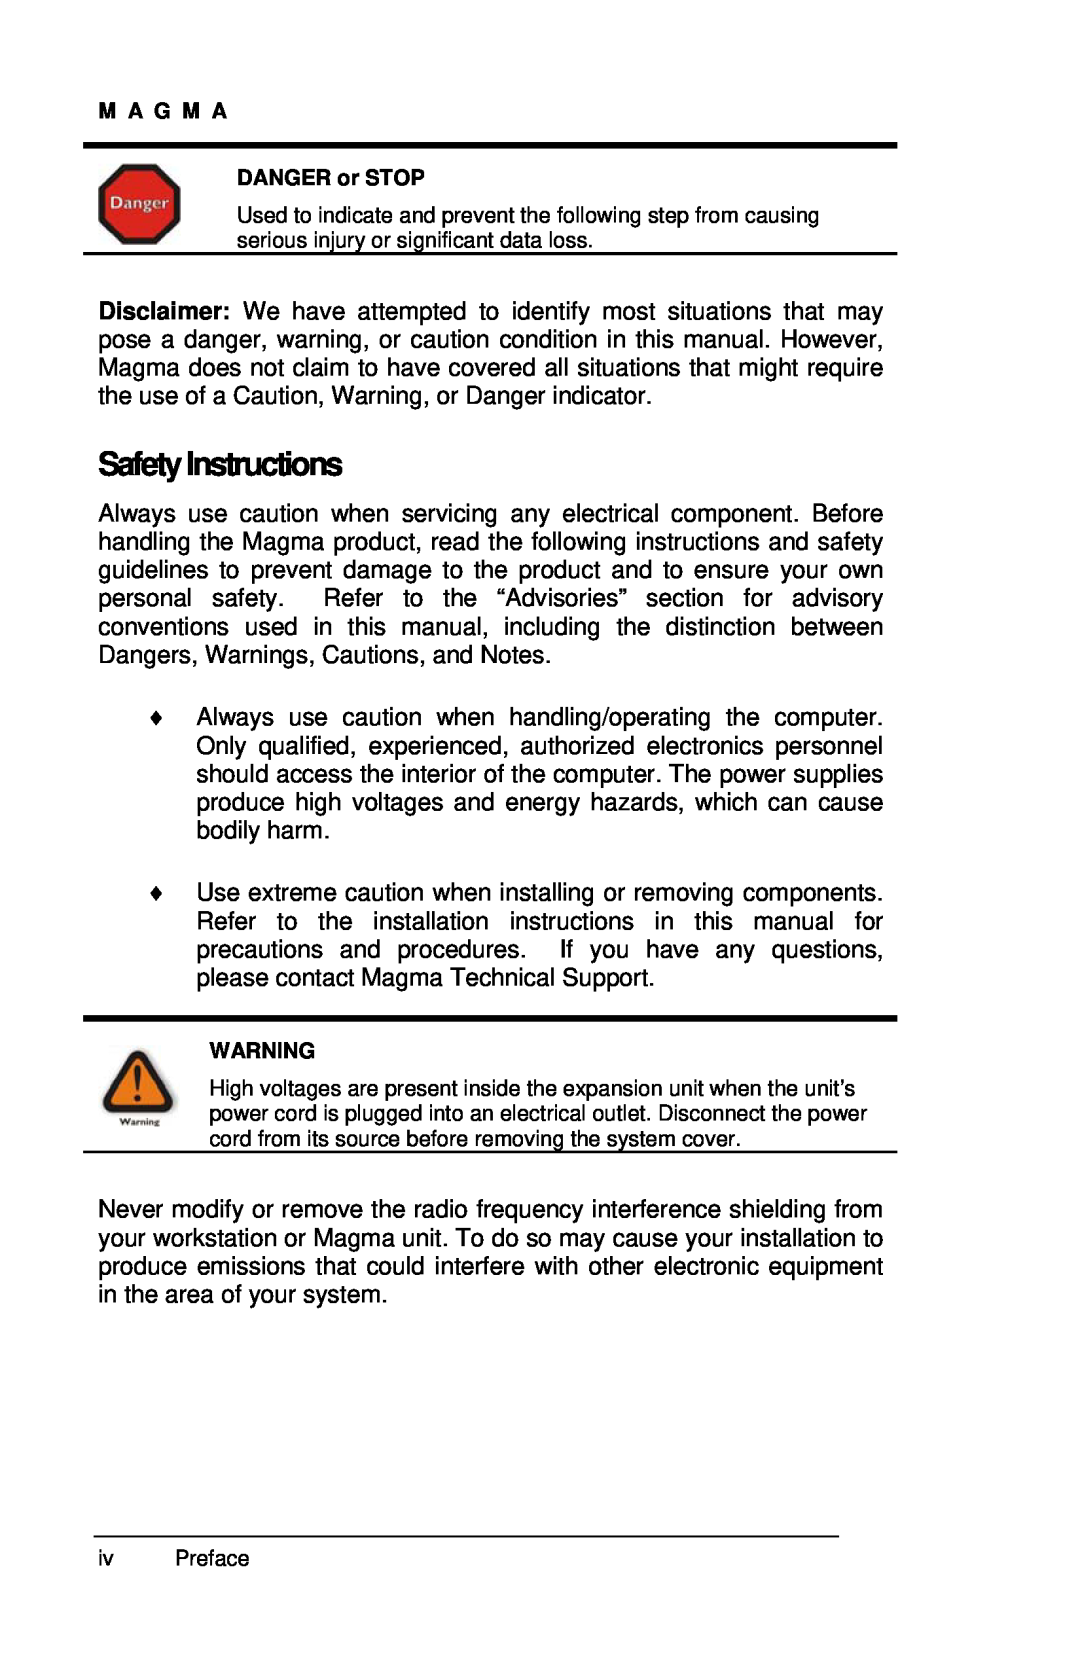 Compaq EB1H, EB1F user manual SafetyInstructions, M A G M A DANGER or STOP 